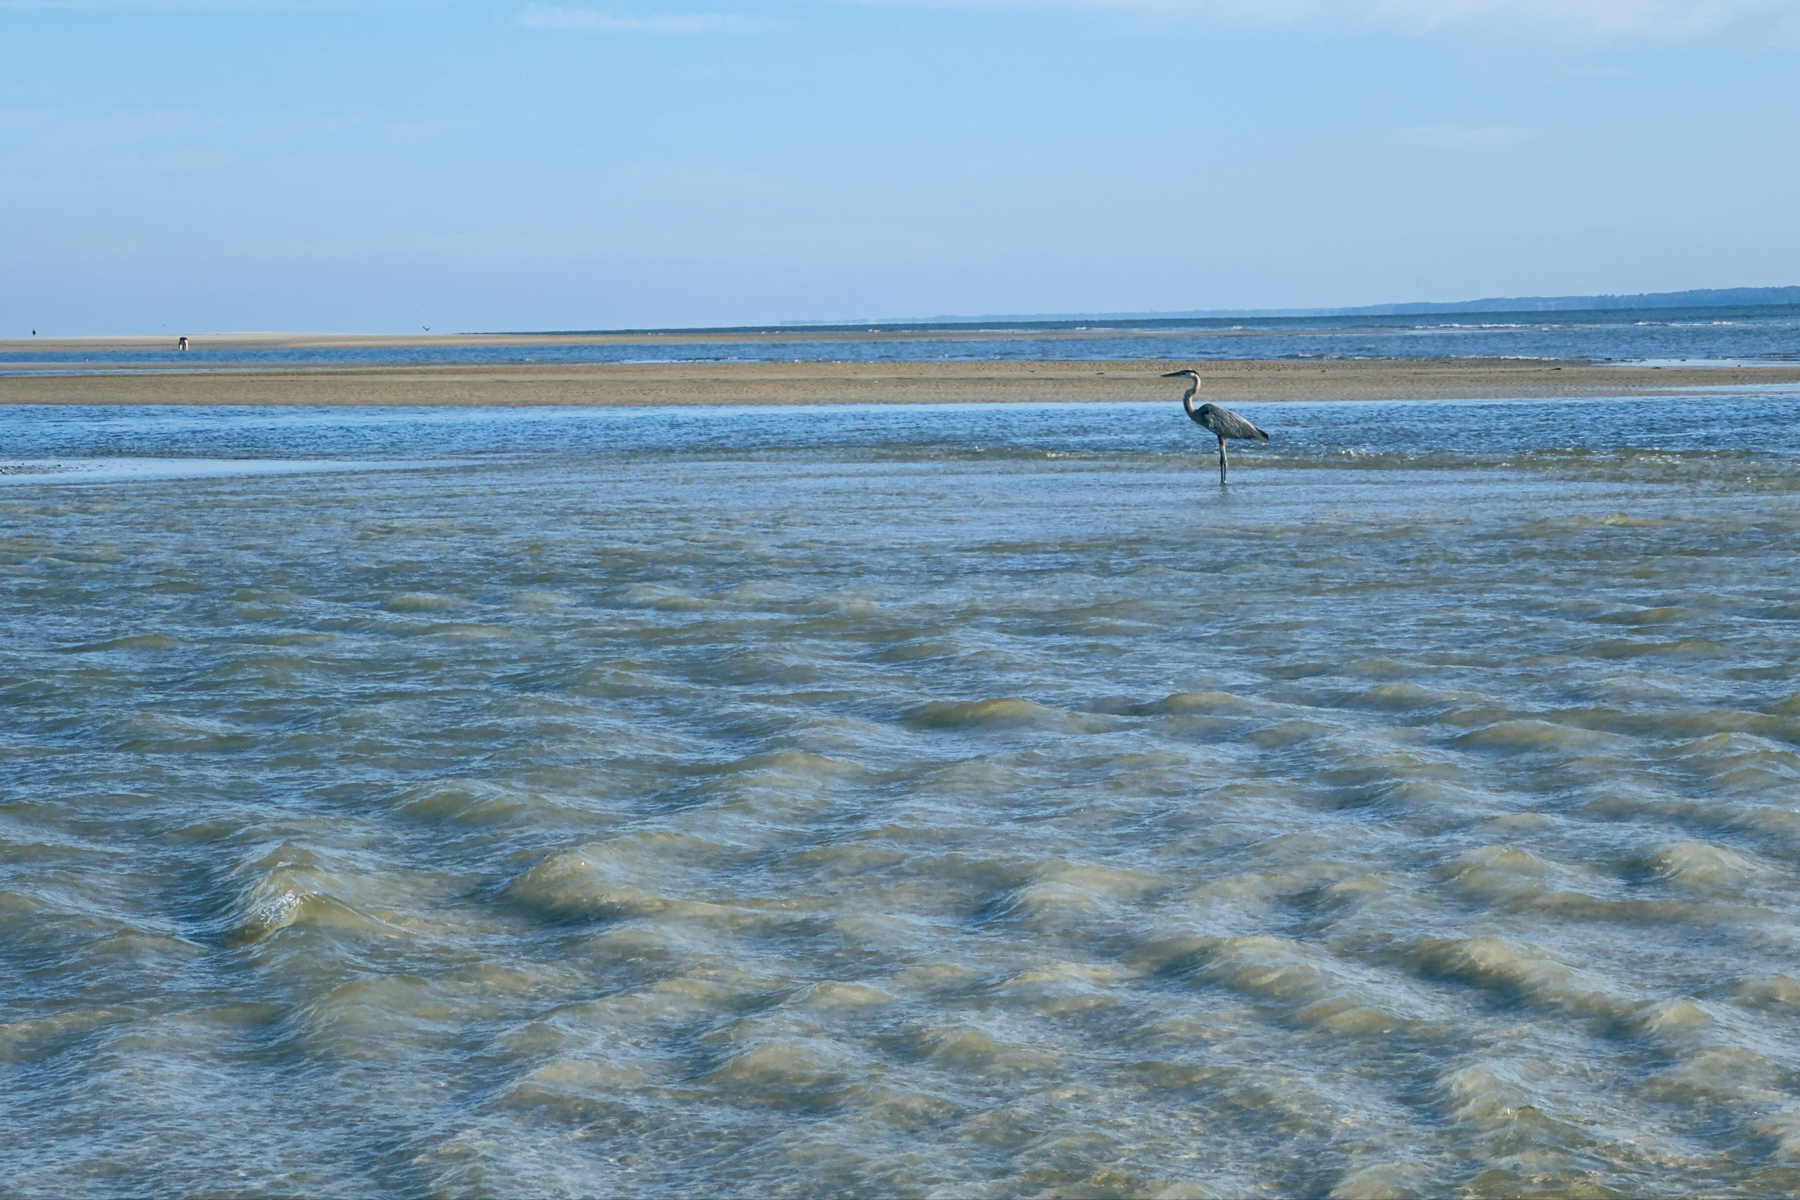 A heron-type bird looks on from very shallow waters of a low-tide beach.